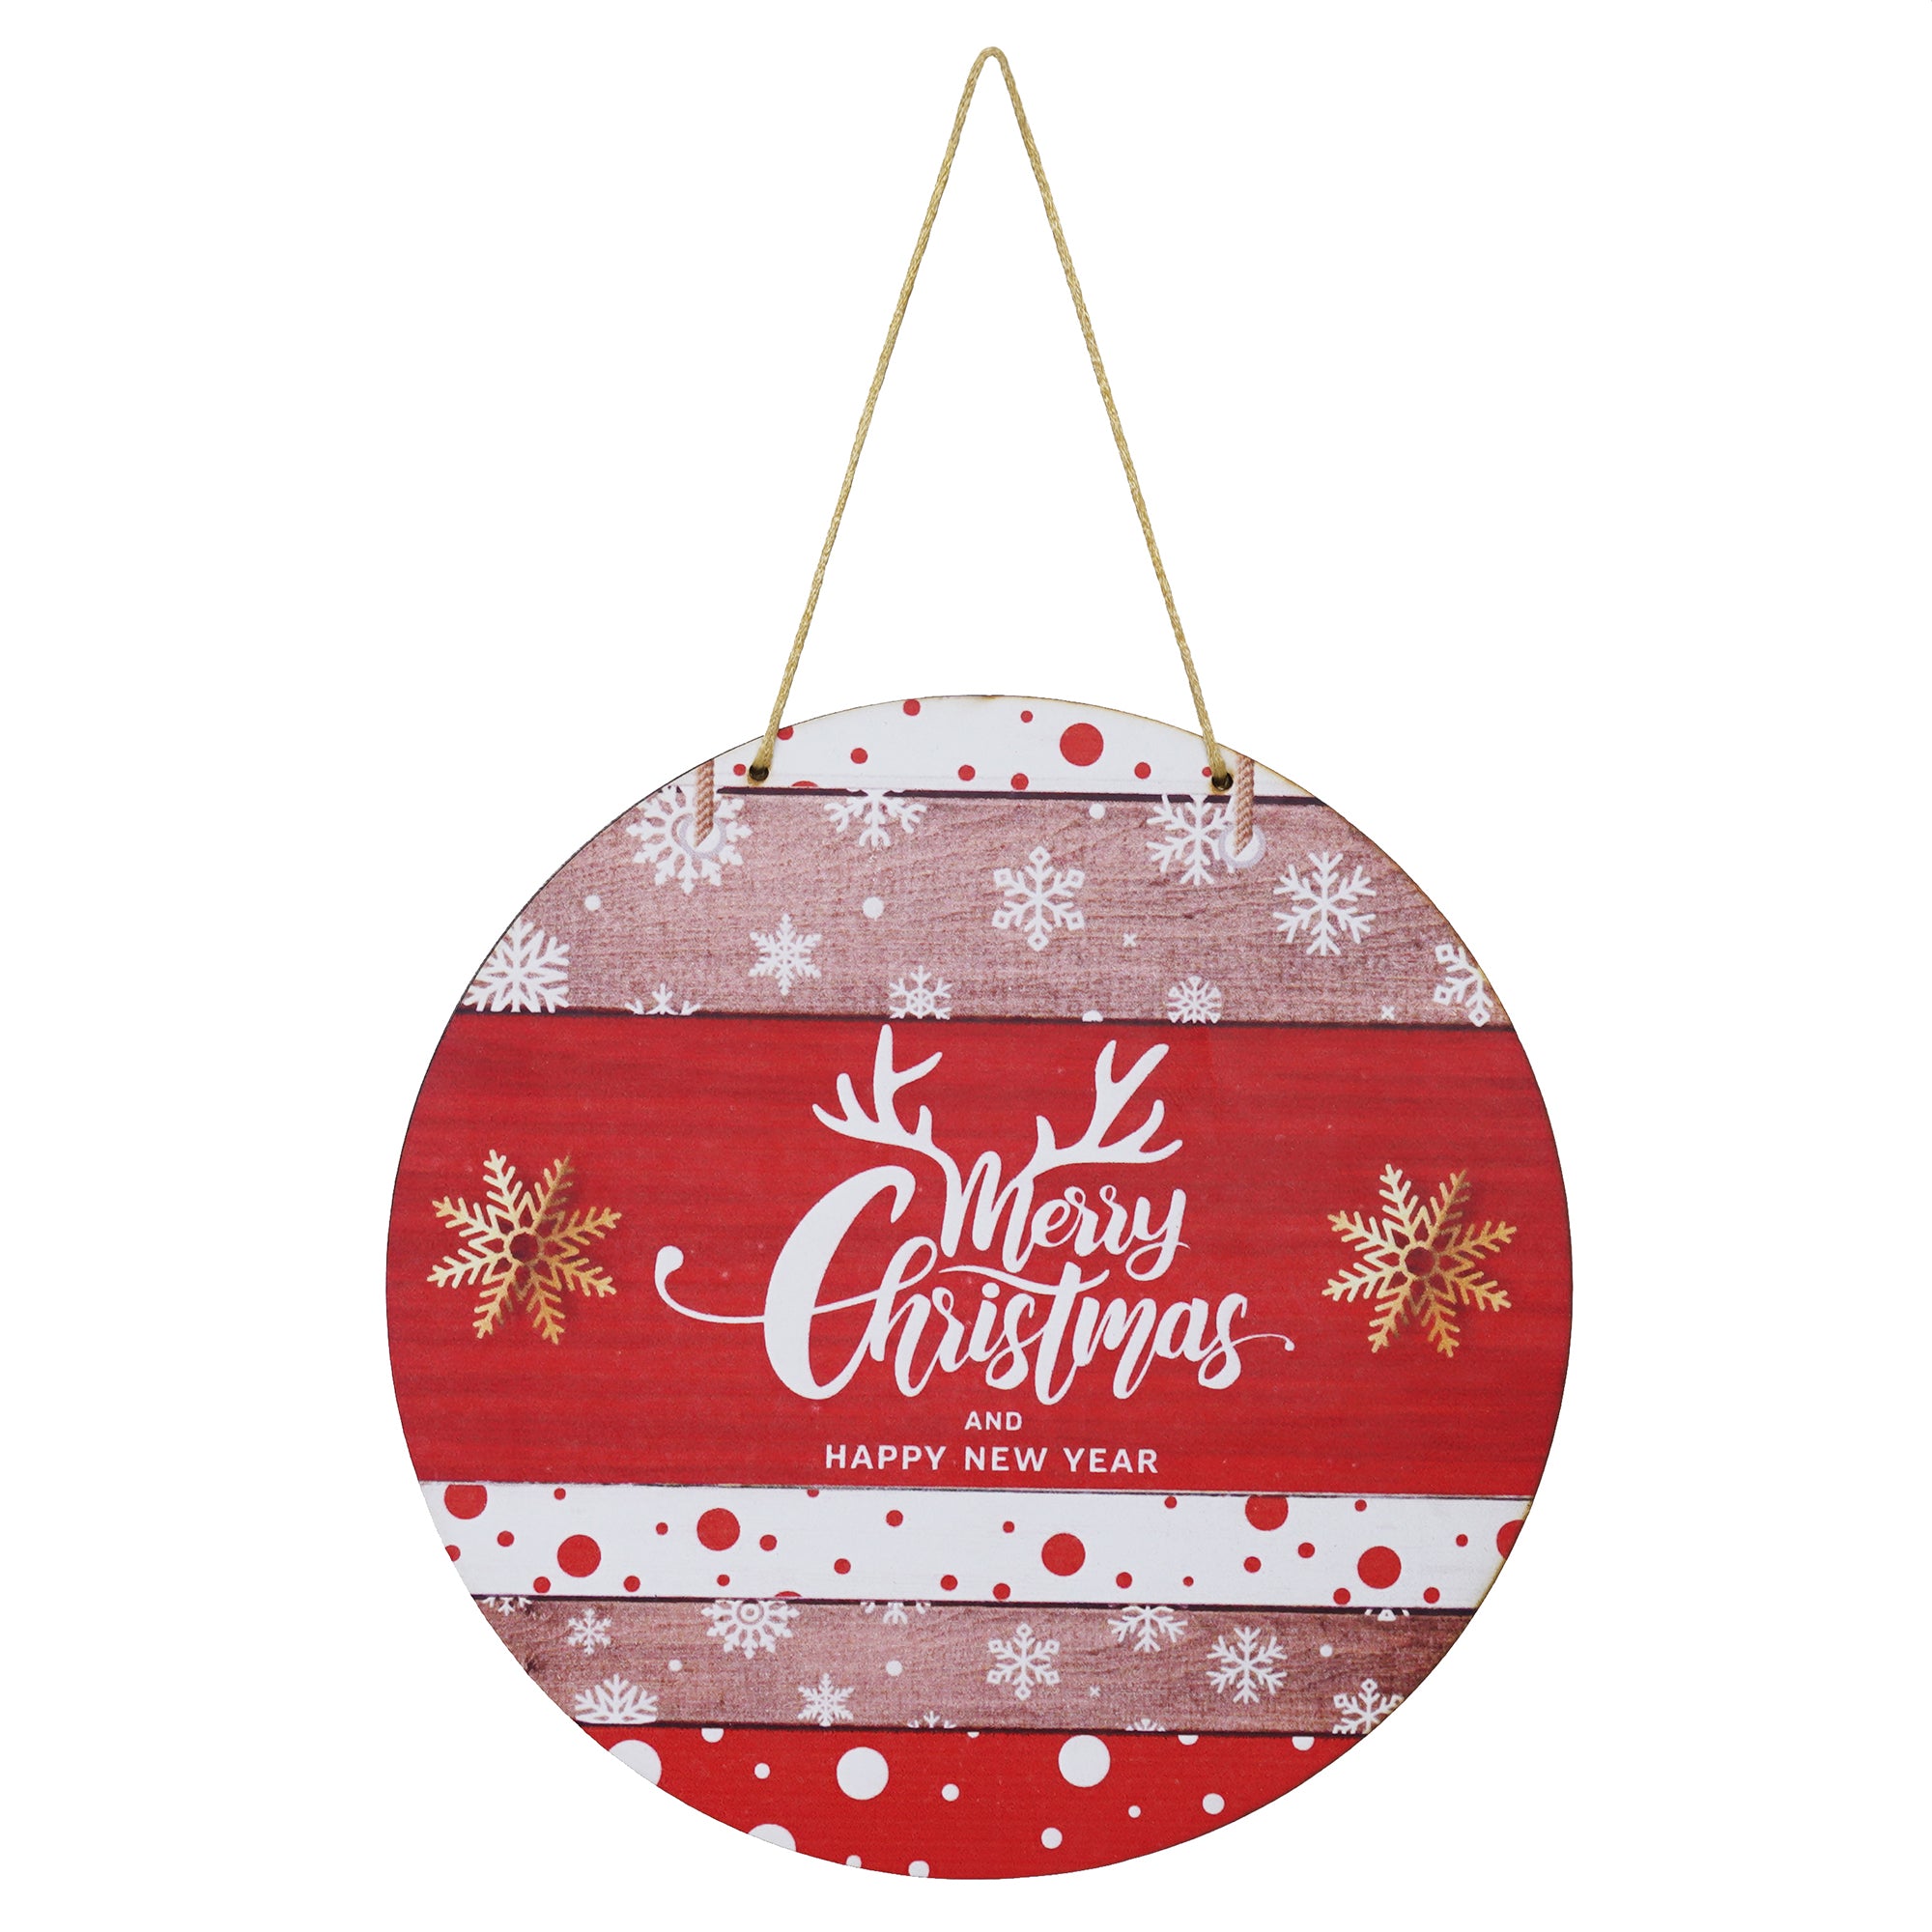 eCraftIndia "Merry Christmas and Happy New Year" Printed Wooden Door Wall Hanging for Home and Christmas Tree Decorations (Red, White, Golden) 2